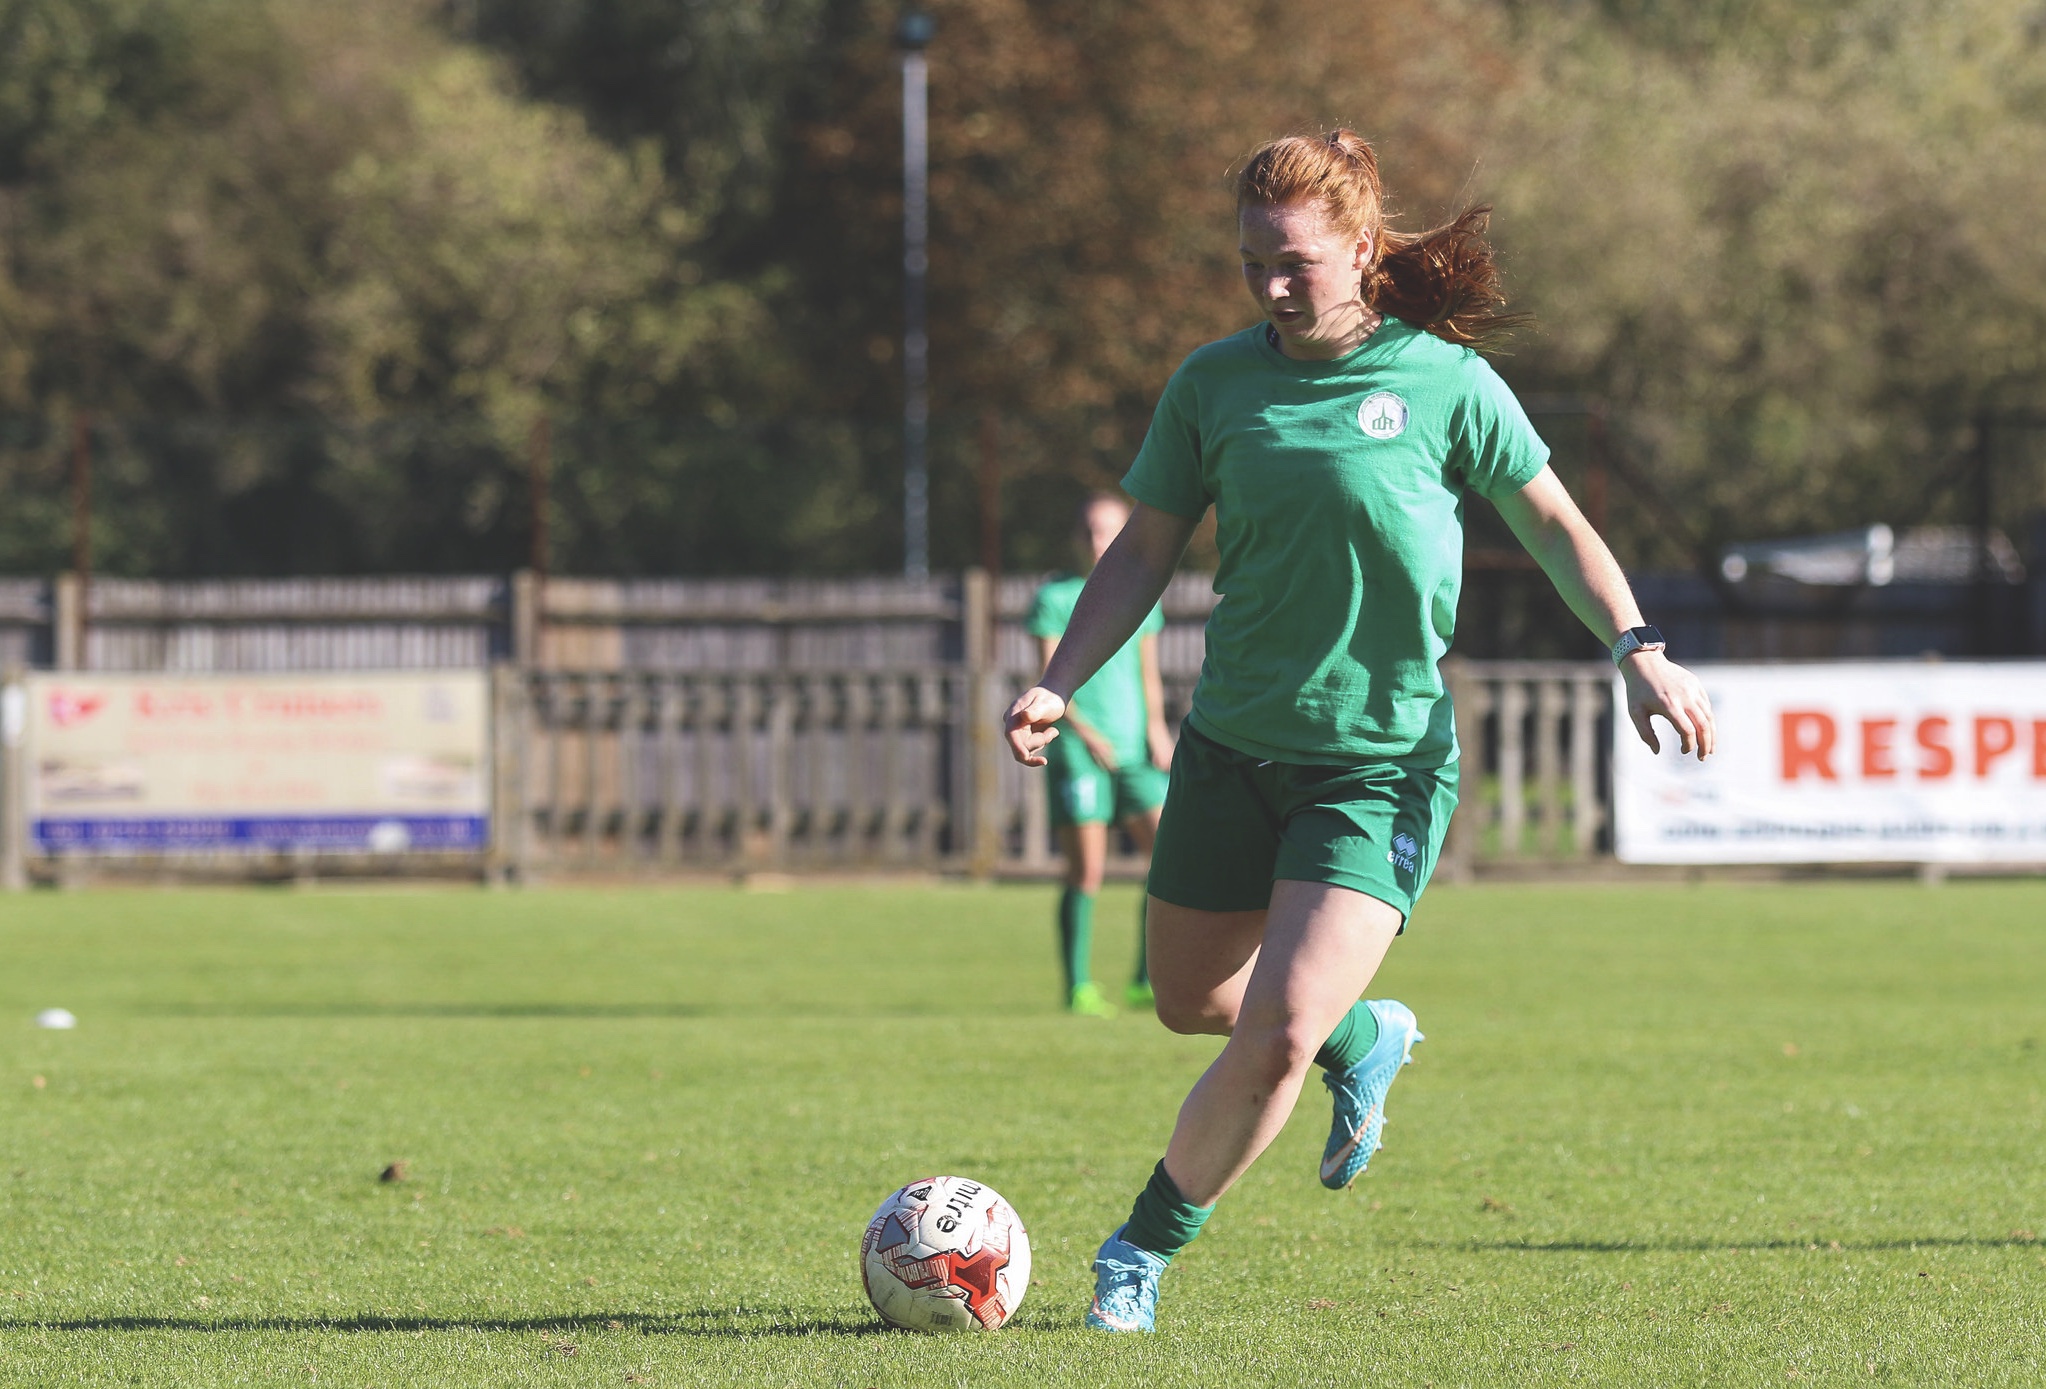 Jade Widdows in action for Chichester City. Taken by Sheena Booker.